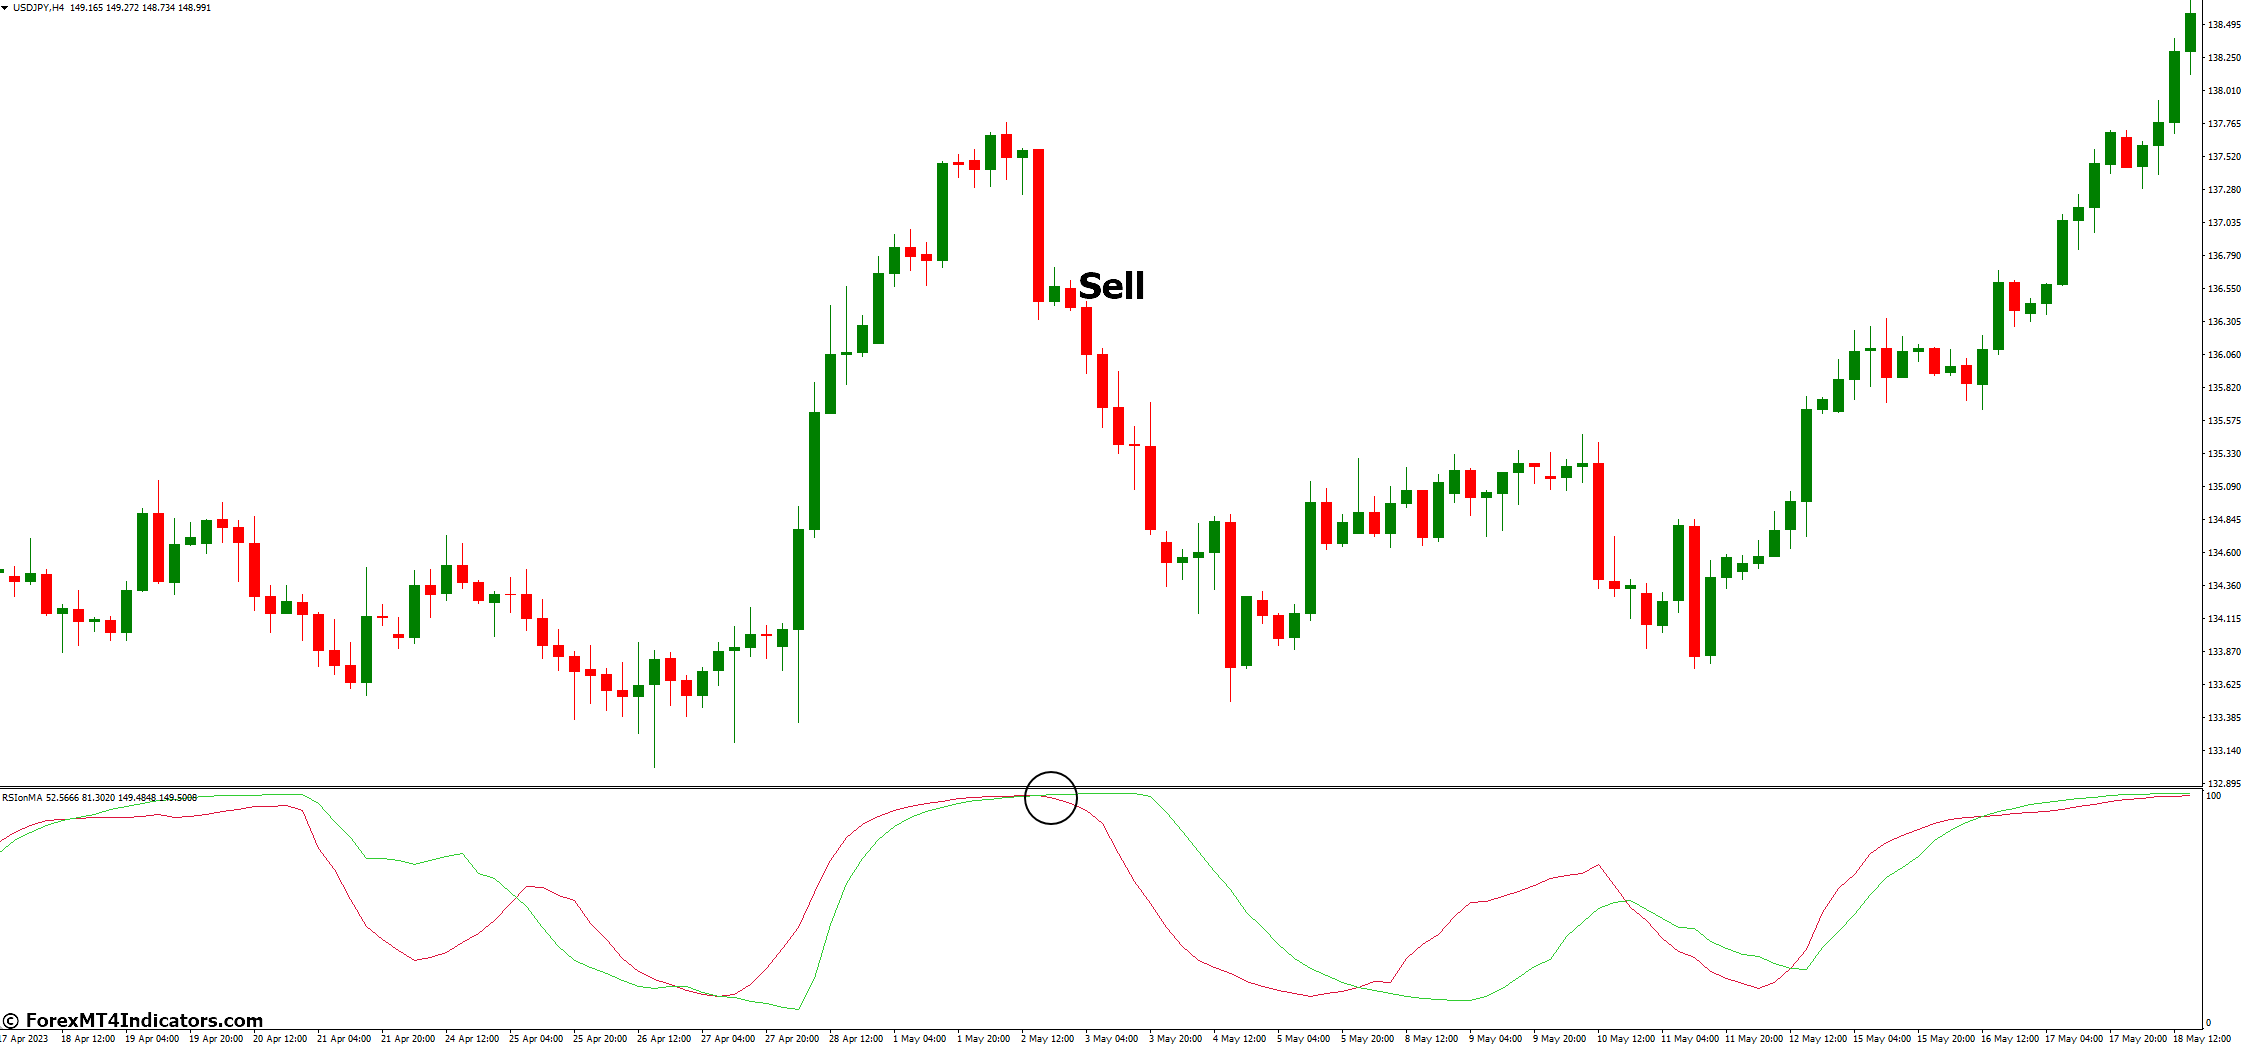 How to Trade with RSI on MA MT4 Indicator - Sell Entry